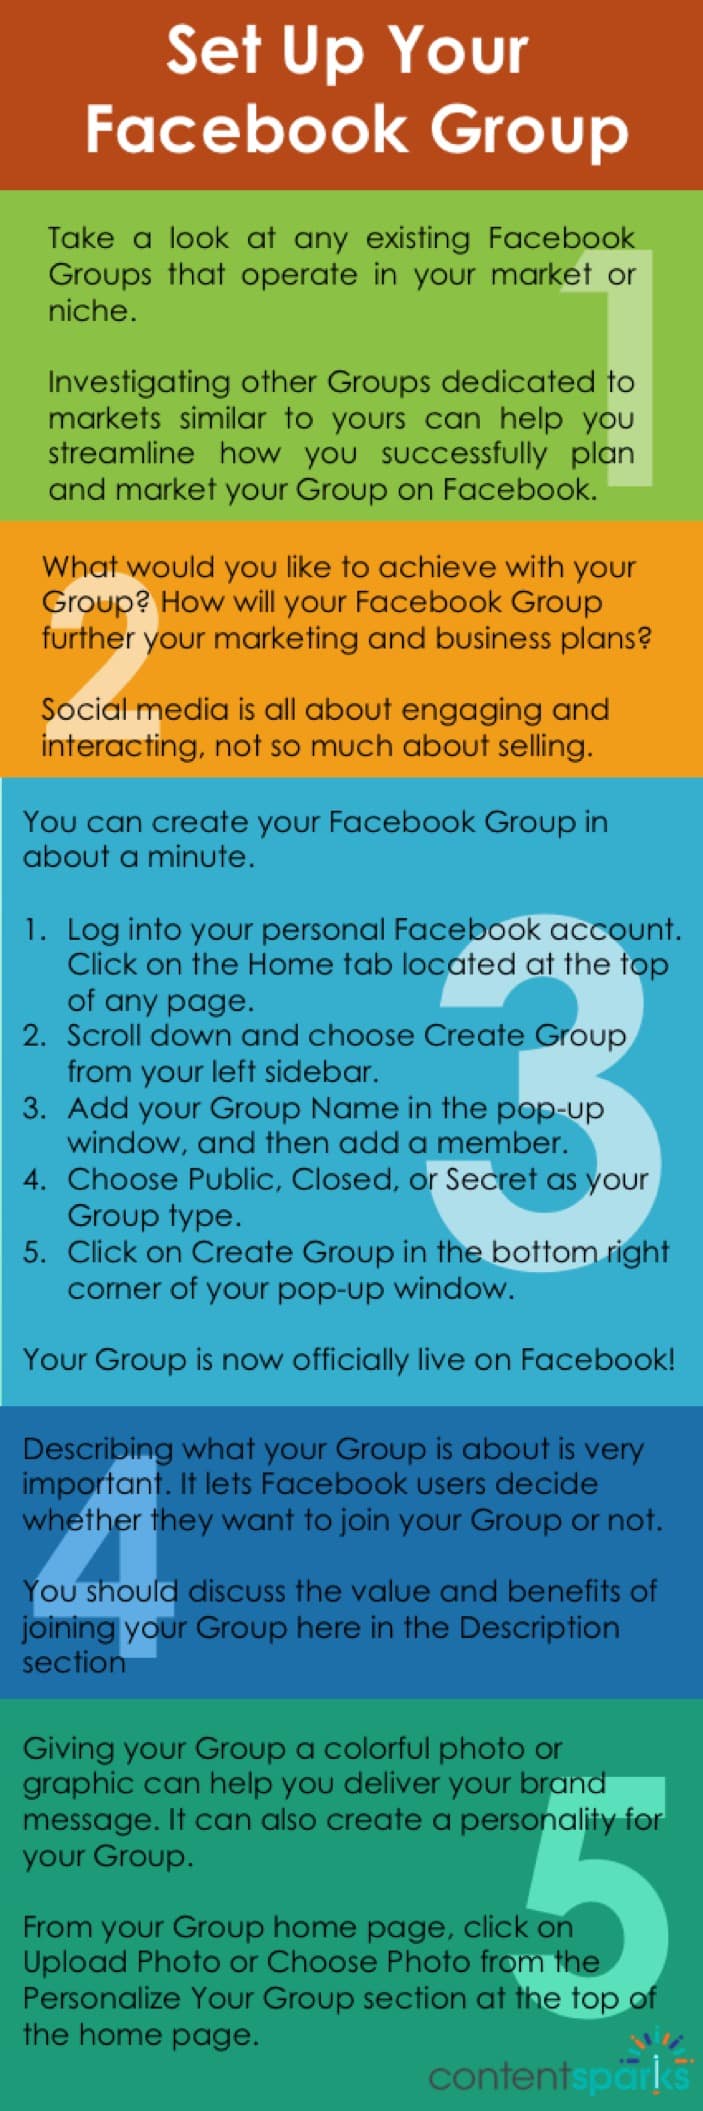 how to set up a facebook group